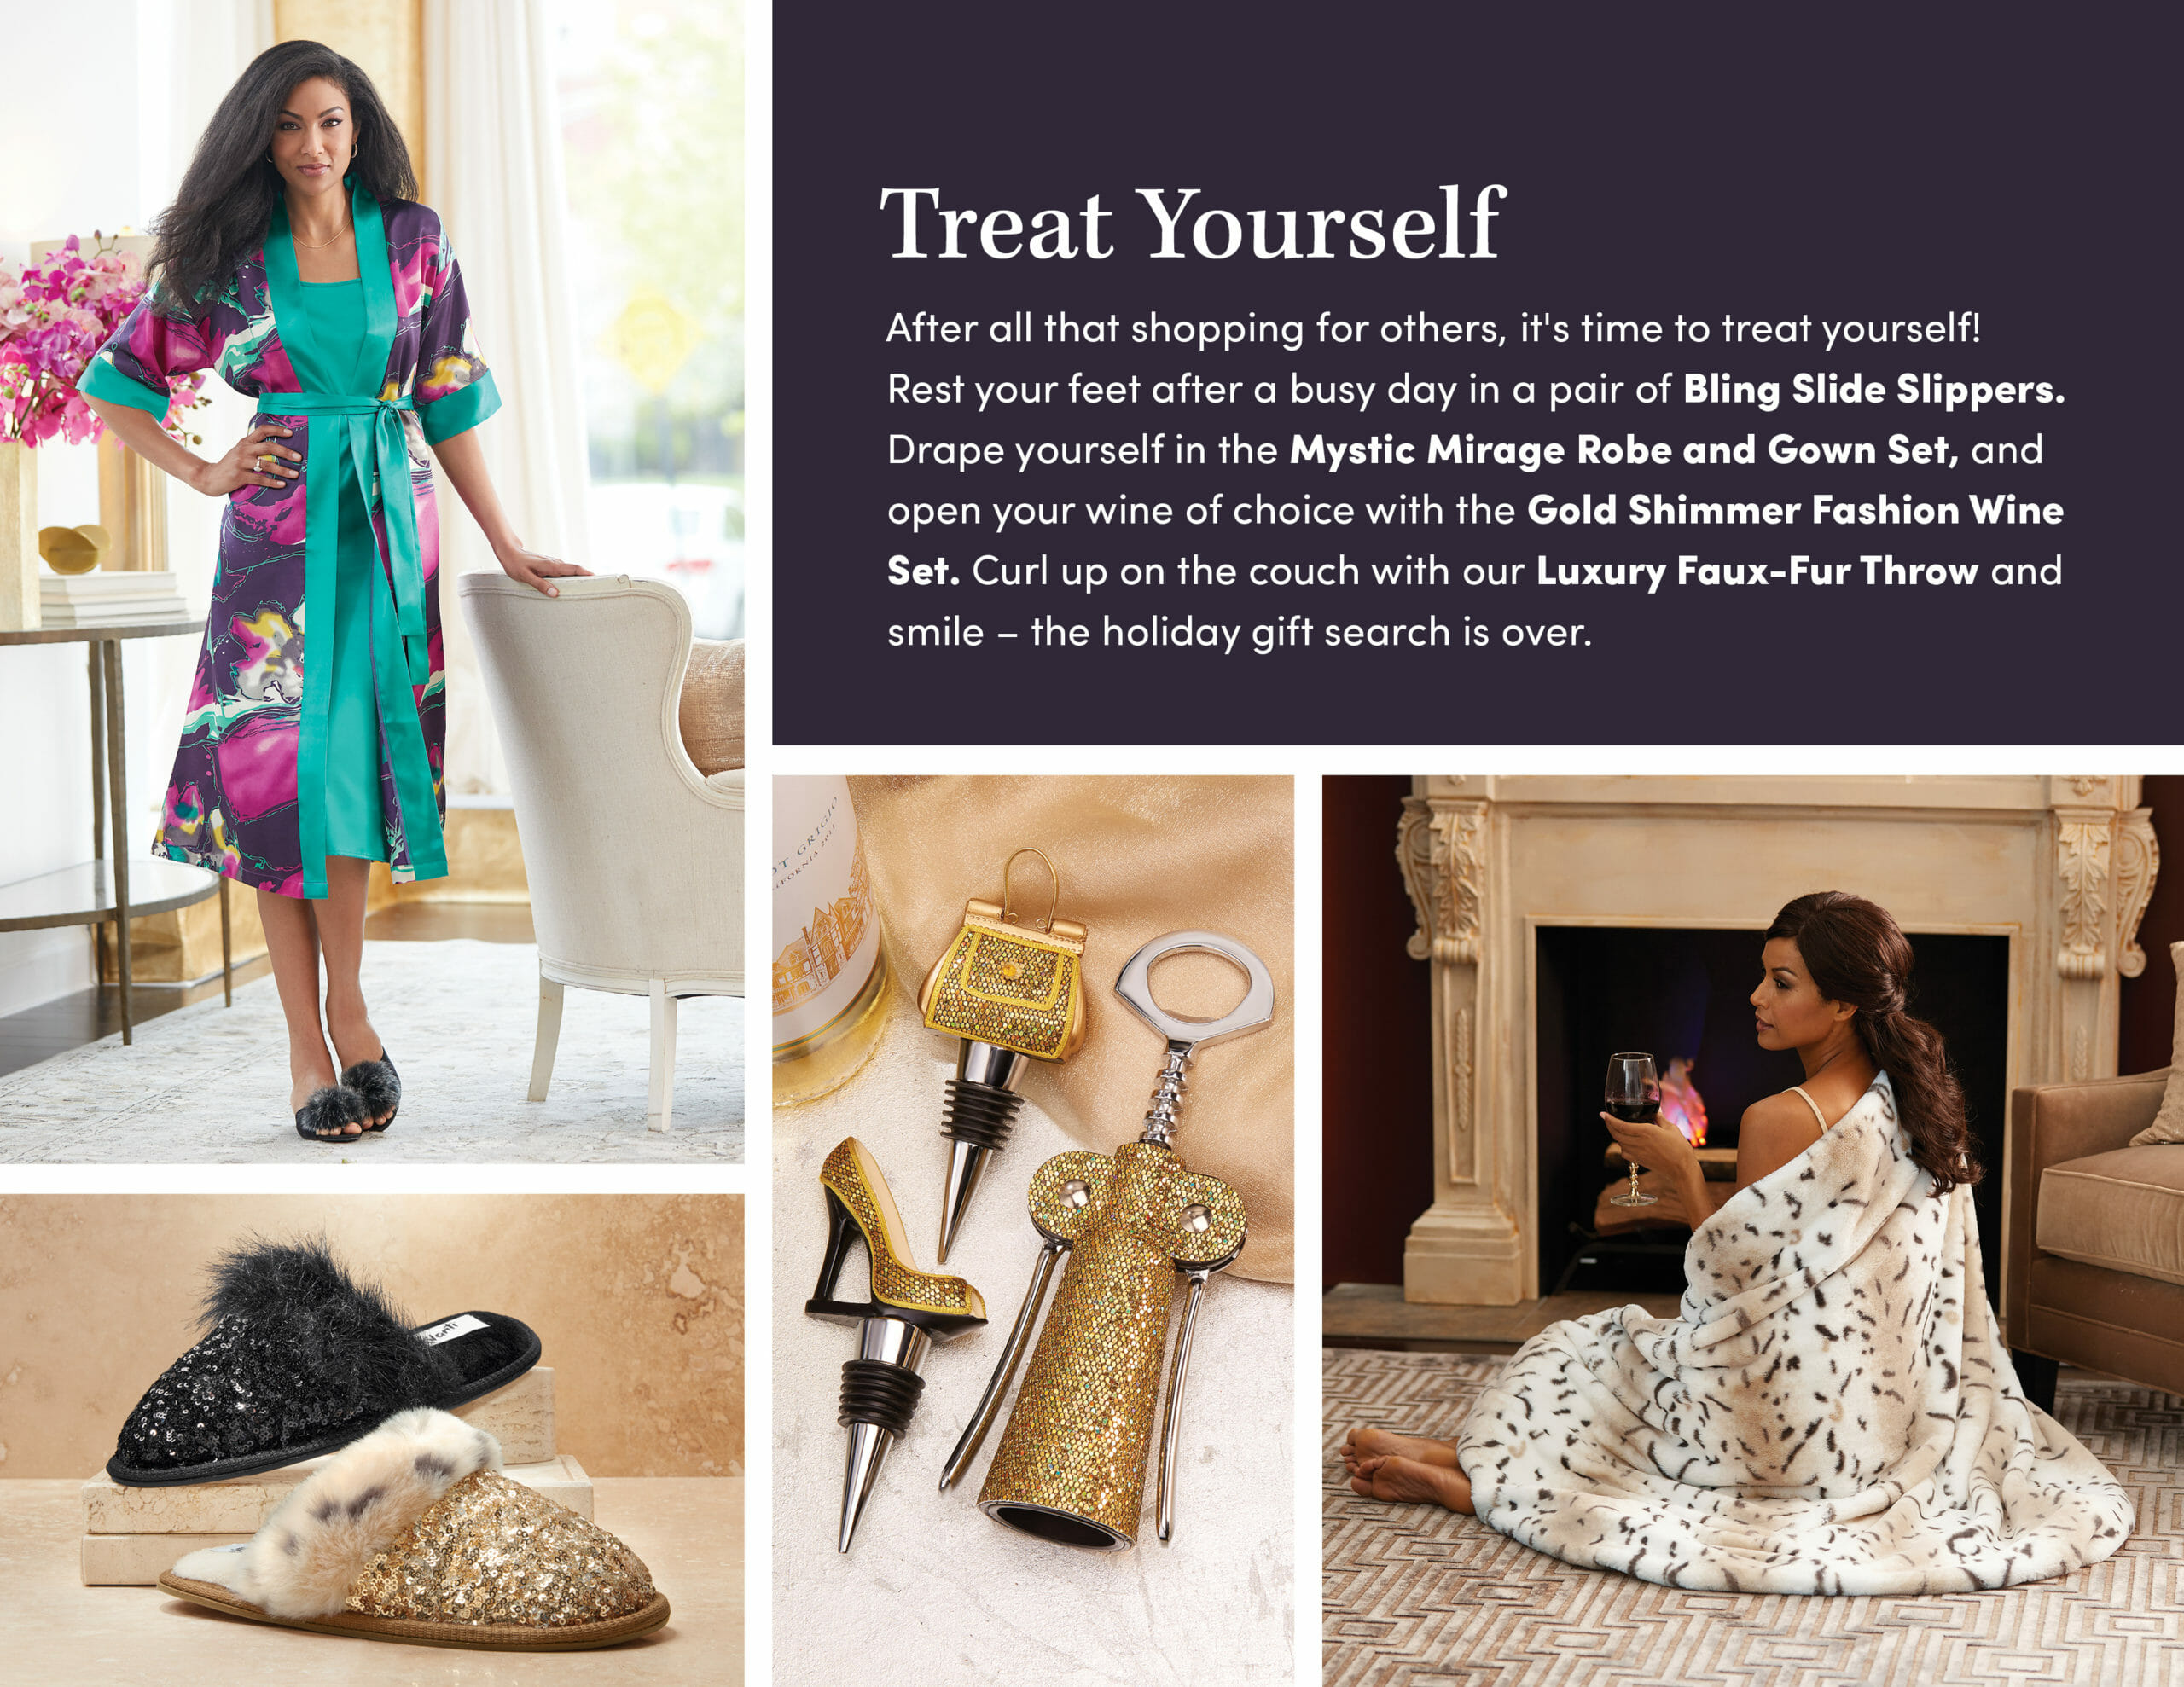 Treat Yourself, A black woman in a silky robe set, sparkly slippers, a gold wine bottle stopper set, a faux fur throw.